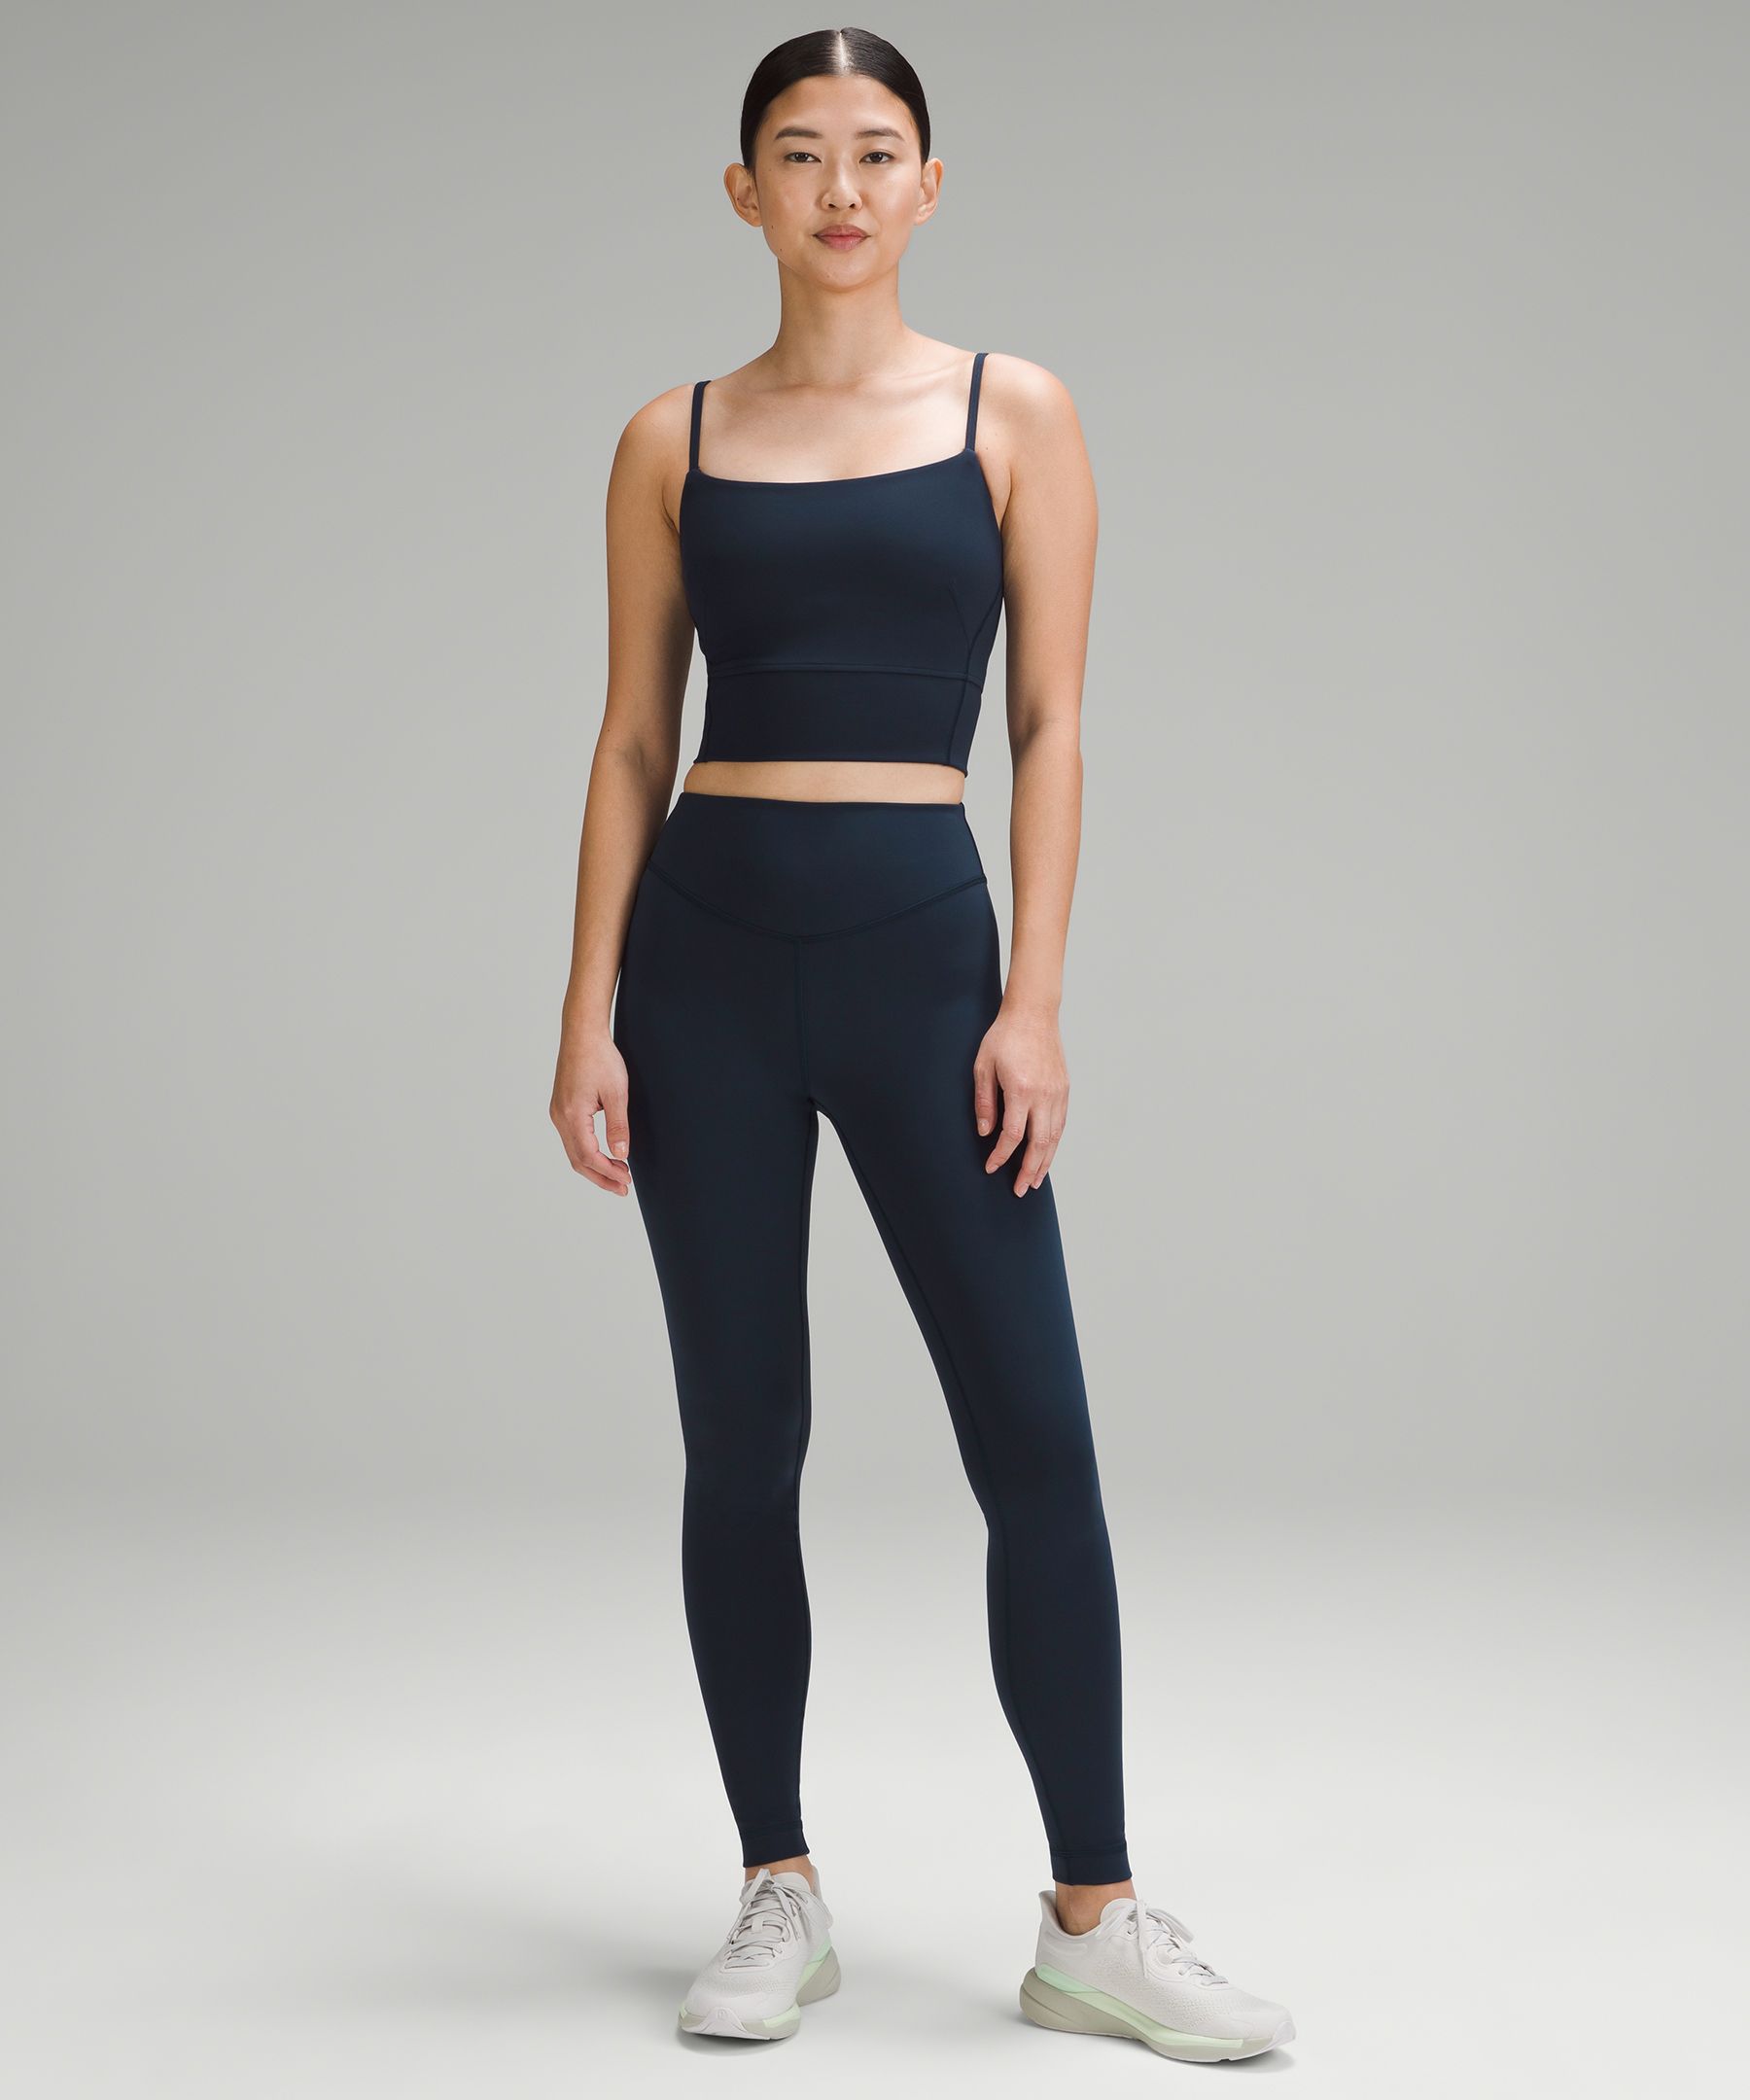 Lululemon Speed Wunder Tight Reflective Black Size 0 - $45 (55% Off Retail)  - From Liya